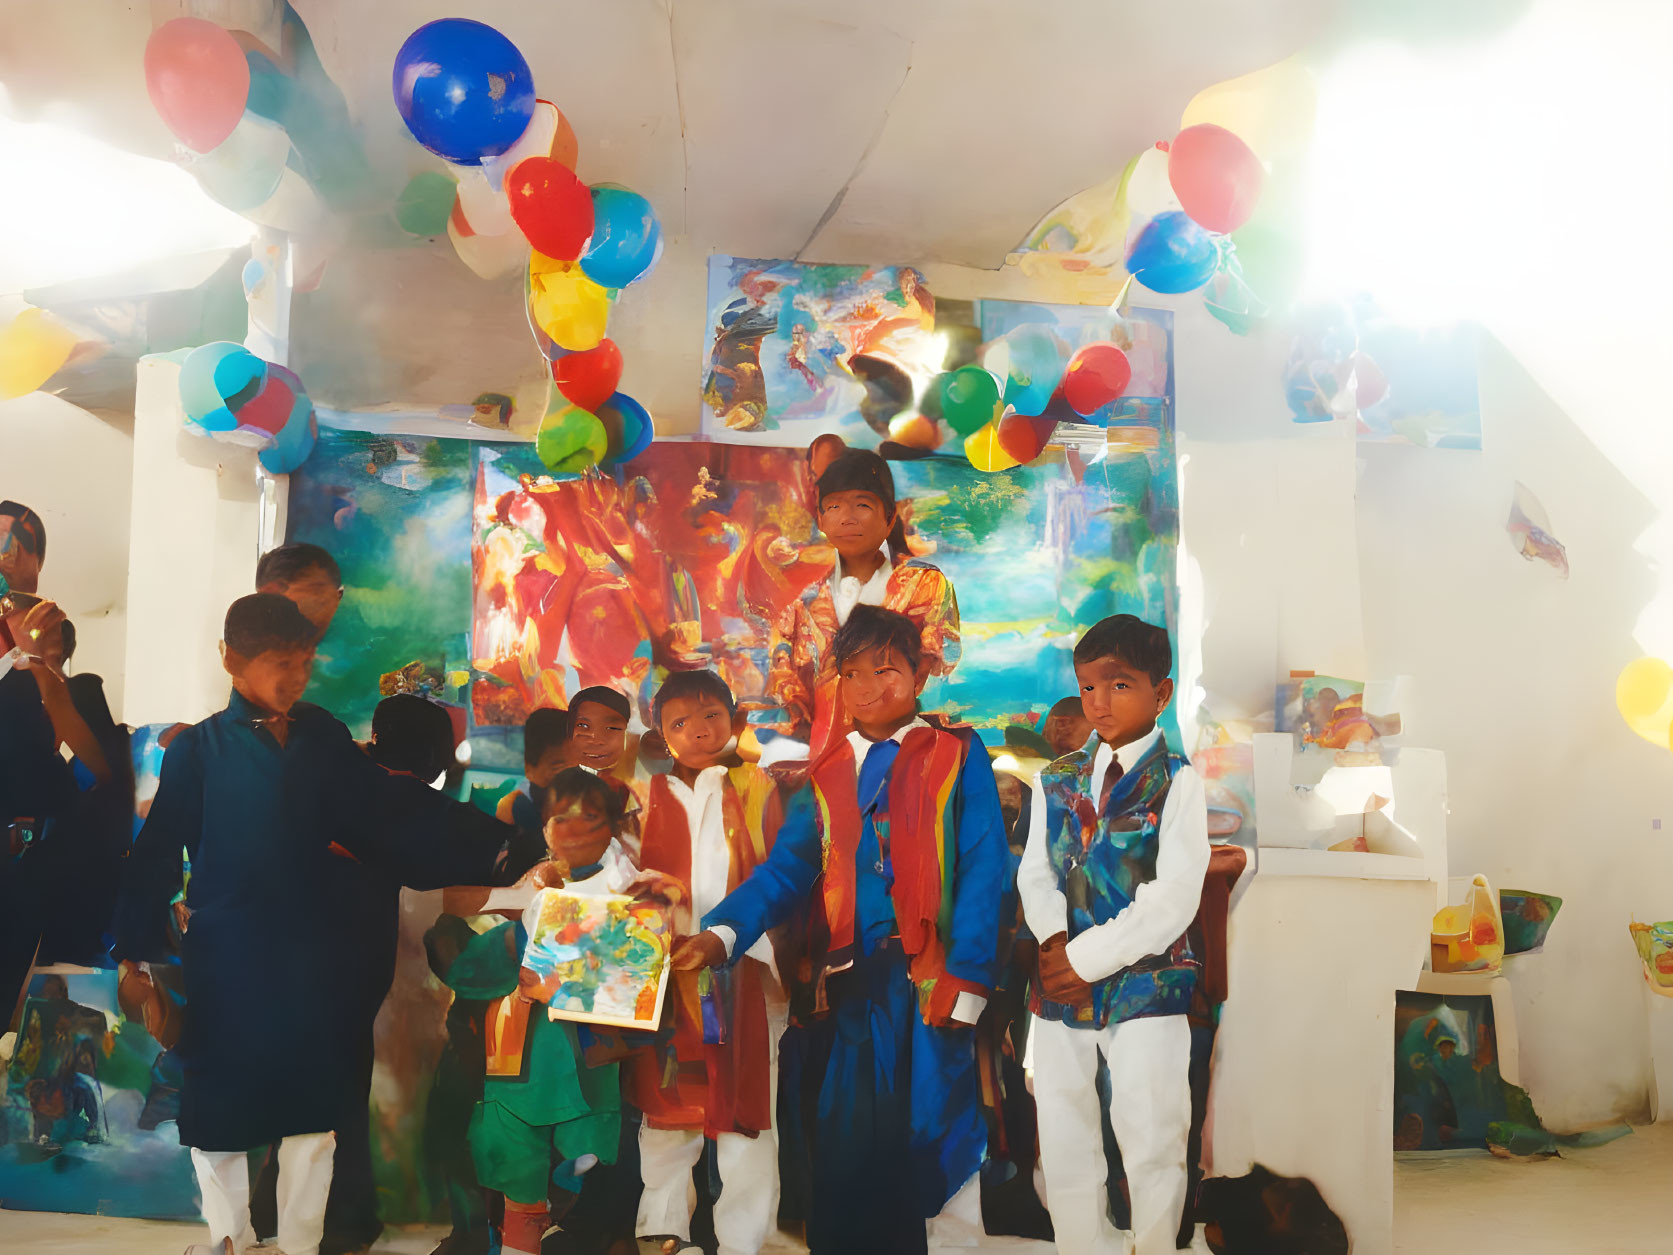 Children in festive clothes at party with balloons and colorful decorations